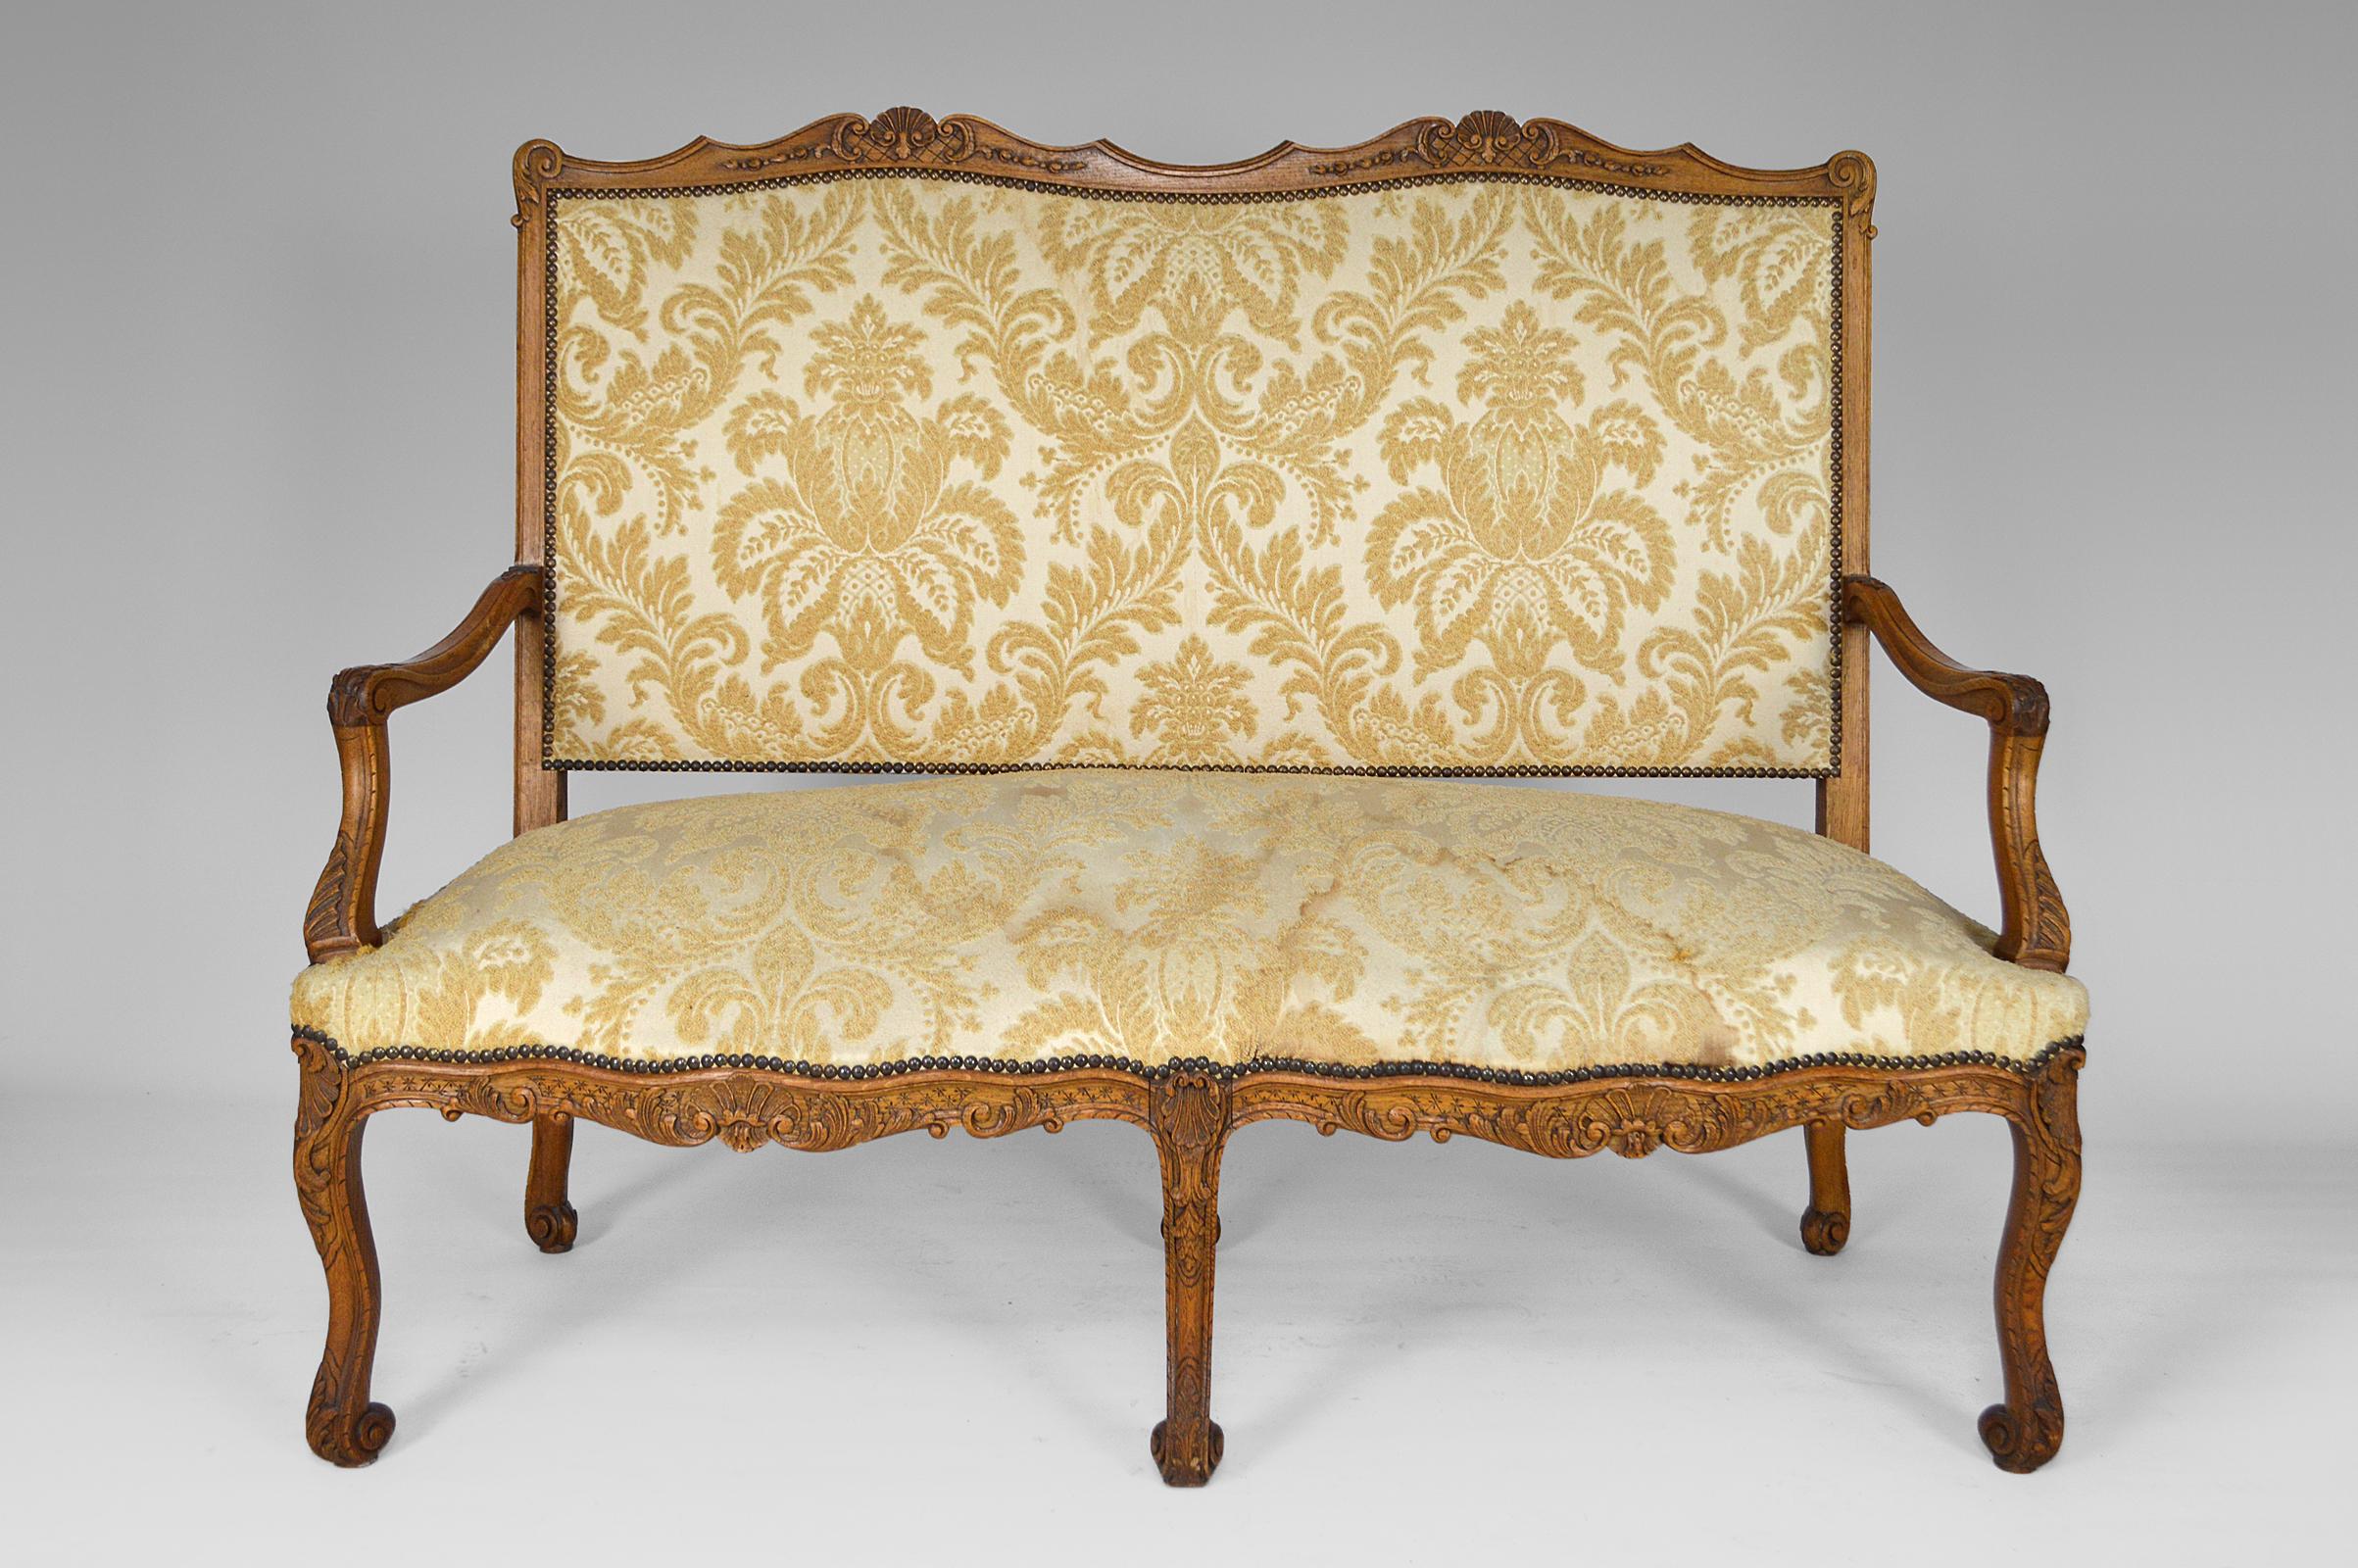 3-seater bench / sofa with carved oak structure and original off-white / beige fabric.

Louis XV style, France, circa 1880-1920.

In good general condition:
- structure in excellent condition
- fabric stained and torn in places (see photos) to be